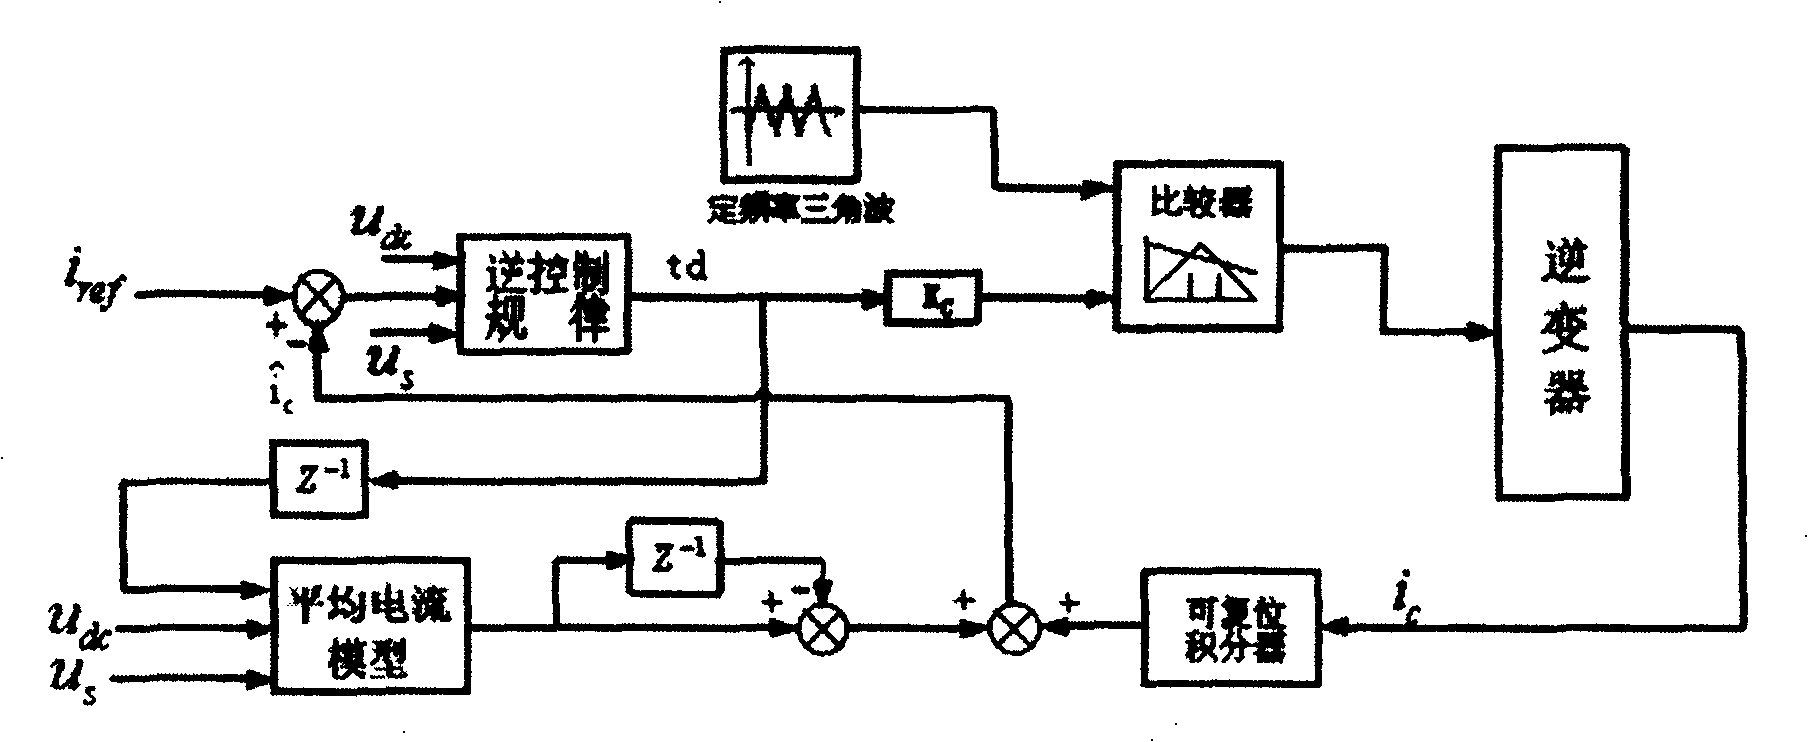 Counter control current tracking control method based on average current compensation